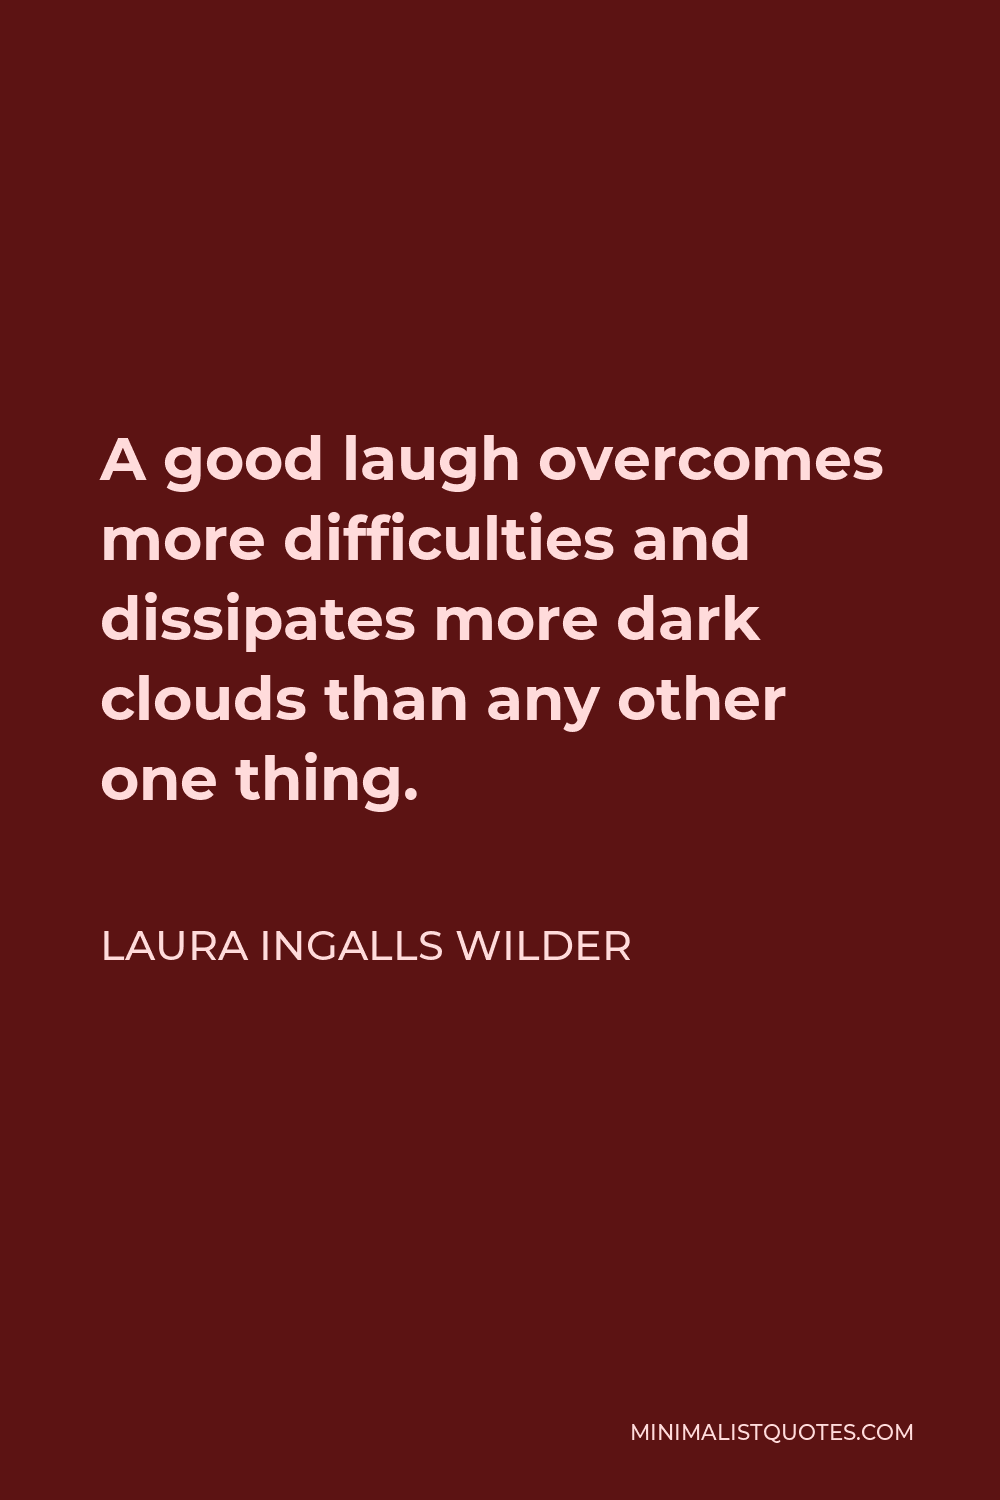 Laura Ingalls Wilder Quote - A good laugh overcomes more difficulties and dissipates more dark clouds than any other one thing.